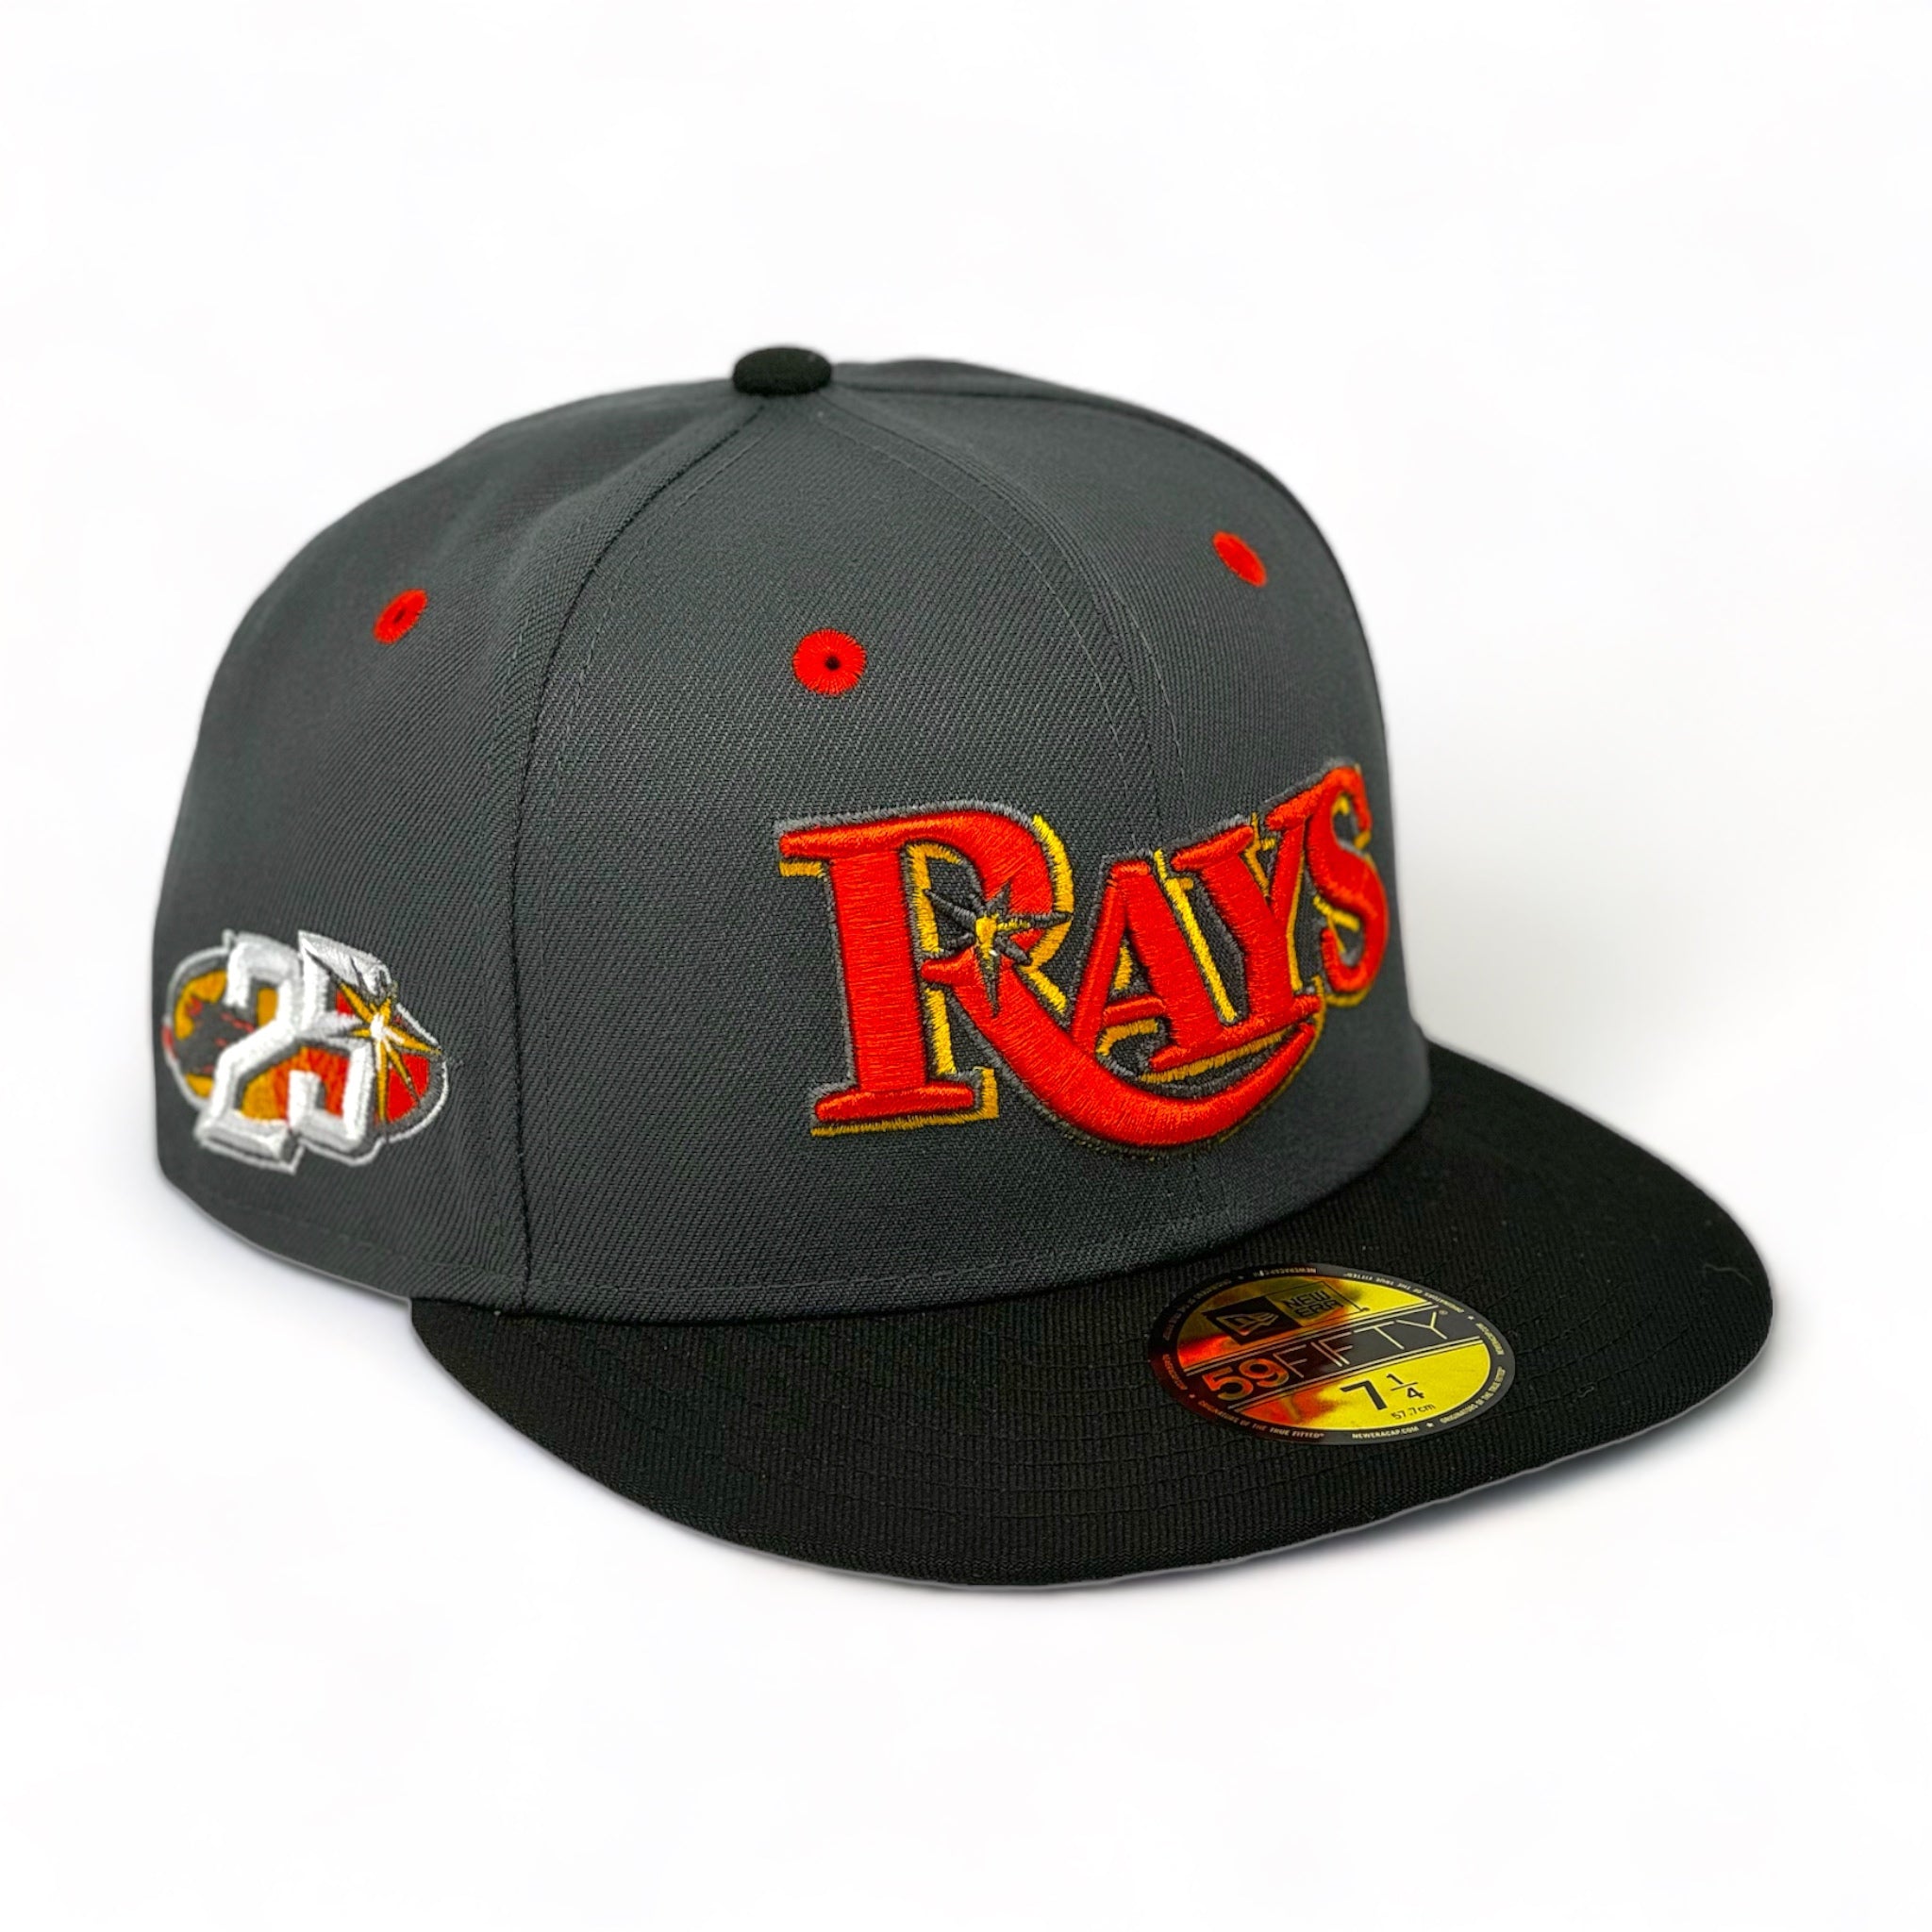 TAMPA BAY DEVILS RAYS (GREY) (25TH ANN) NEW ERA 59FIFTY FITTED